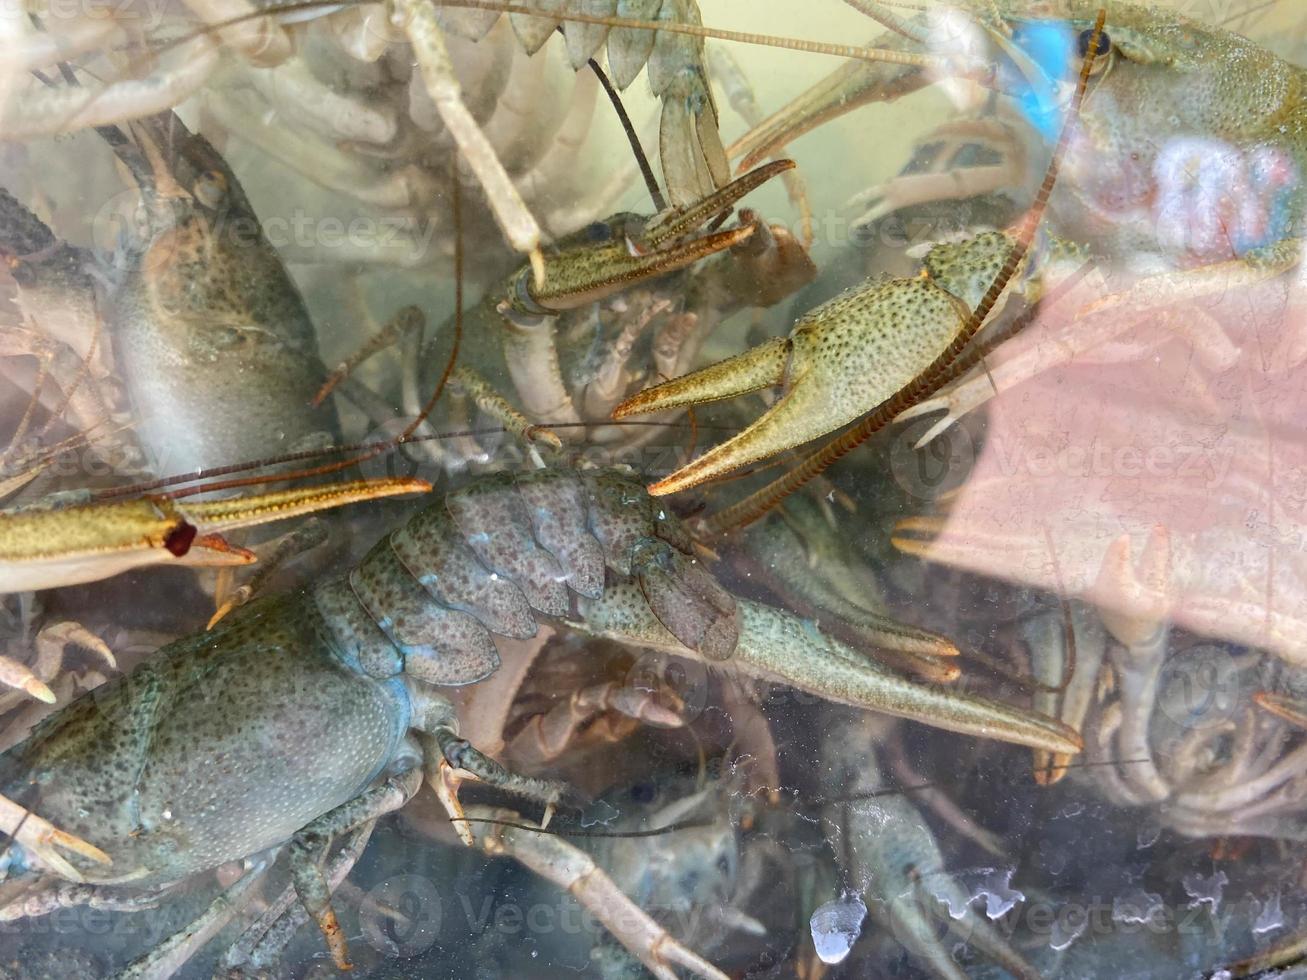 Live crayfish swimming in water. Many crawdads in a store aquarium photo